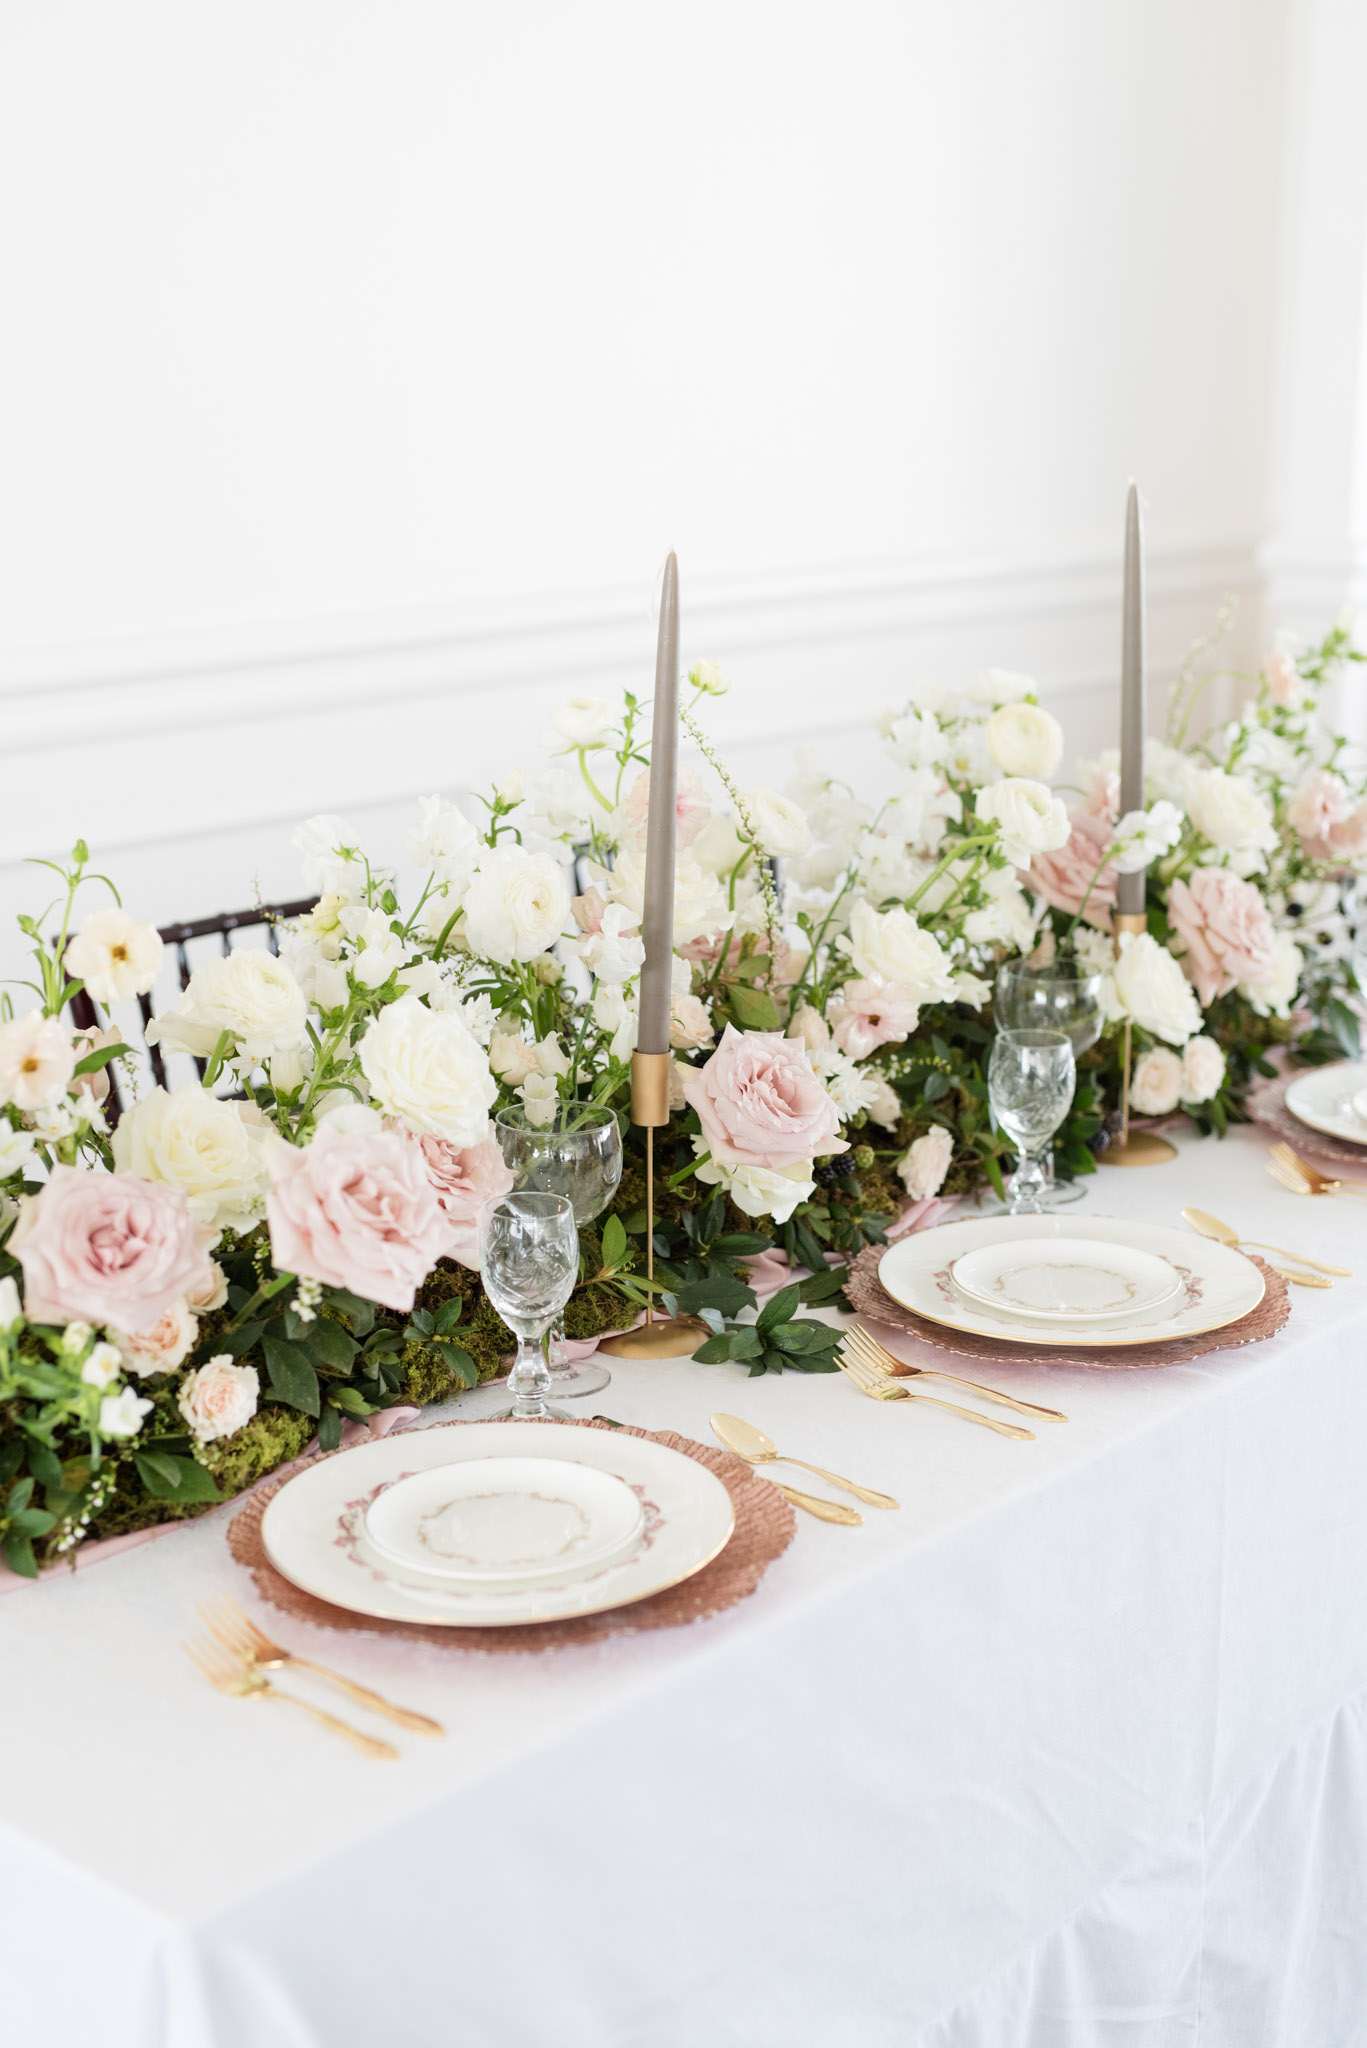 White and rose gold wedding table.